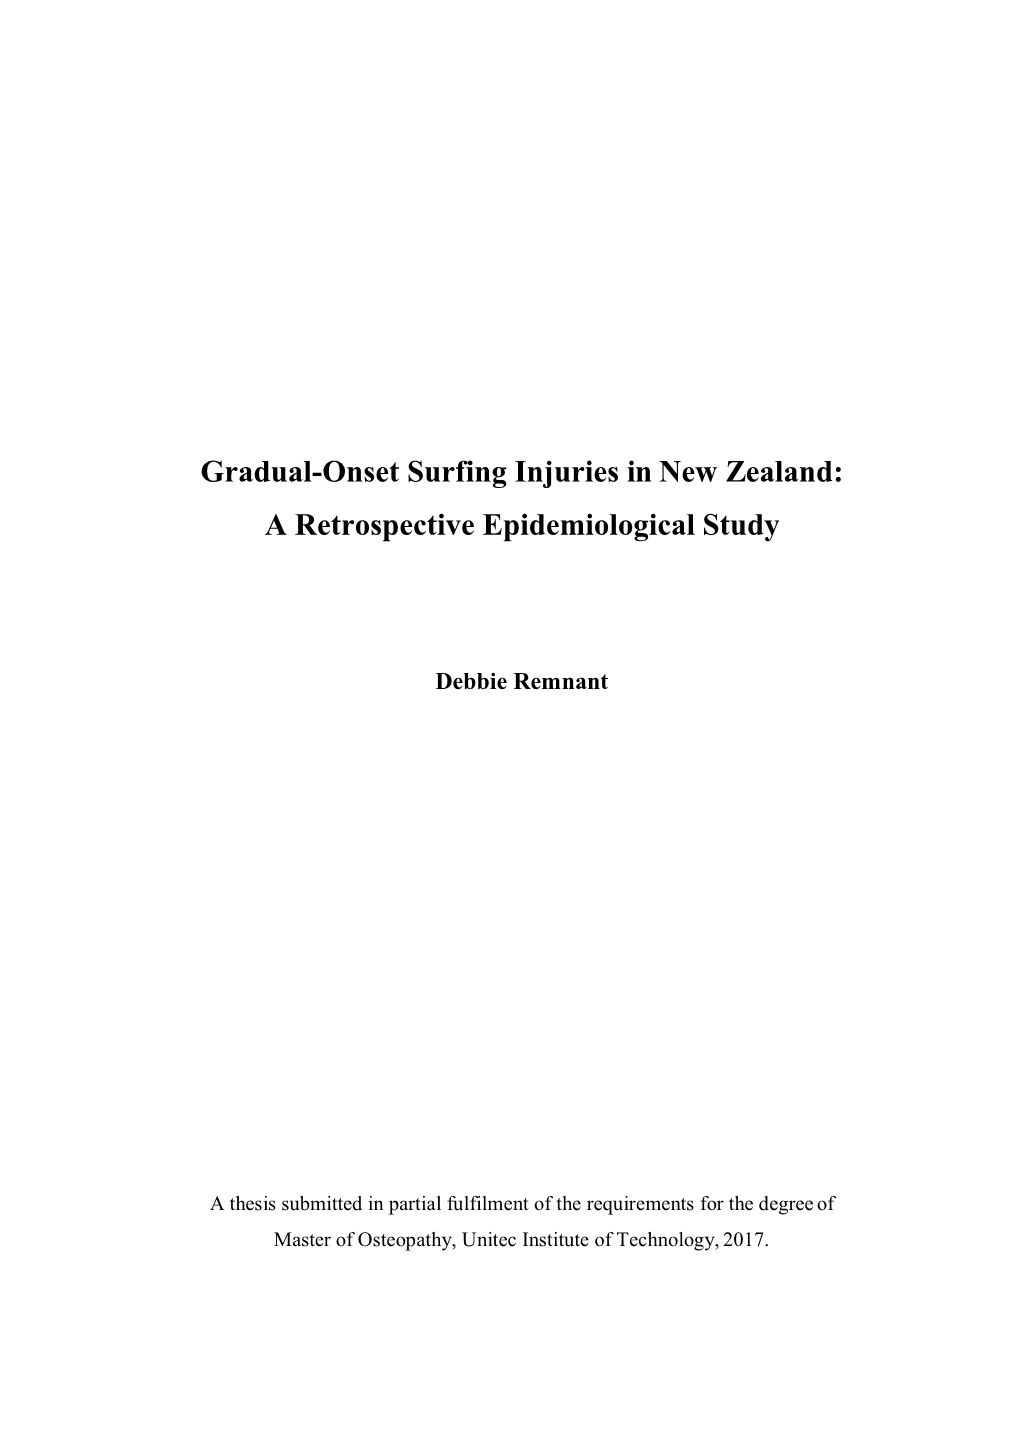 Gradual-Onset Surfing Injuries in New Zealand: a Retrospective Epidemiological Study